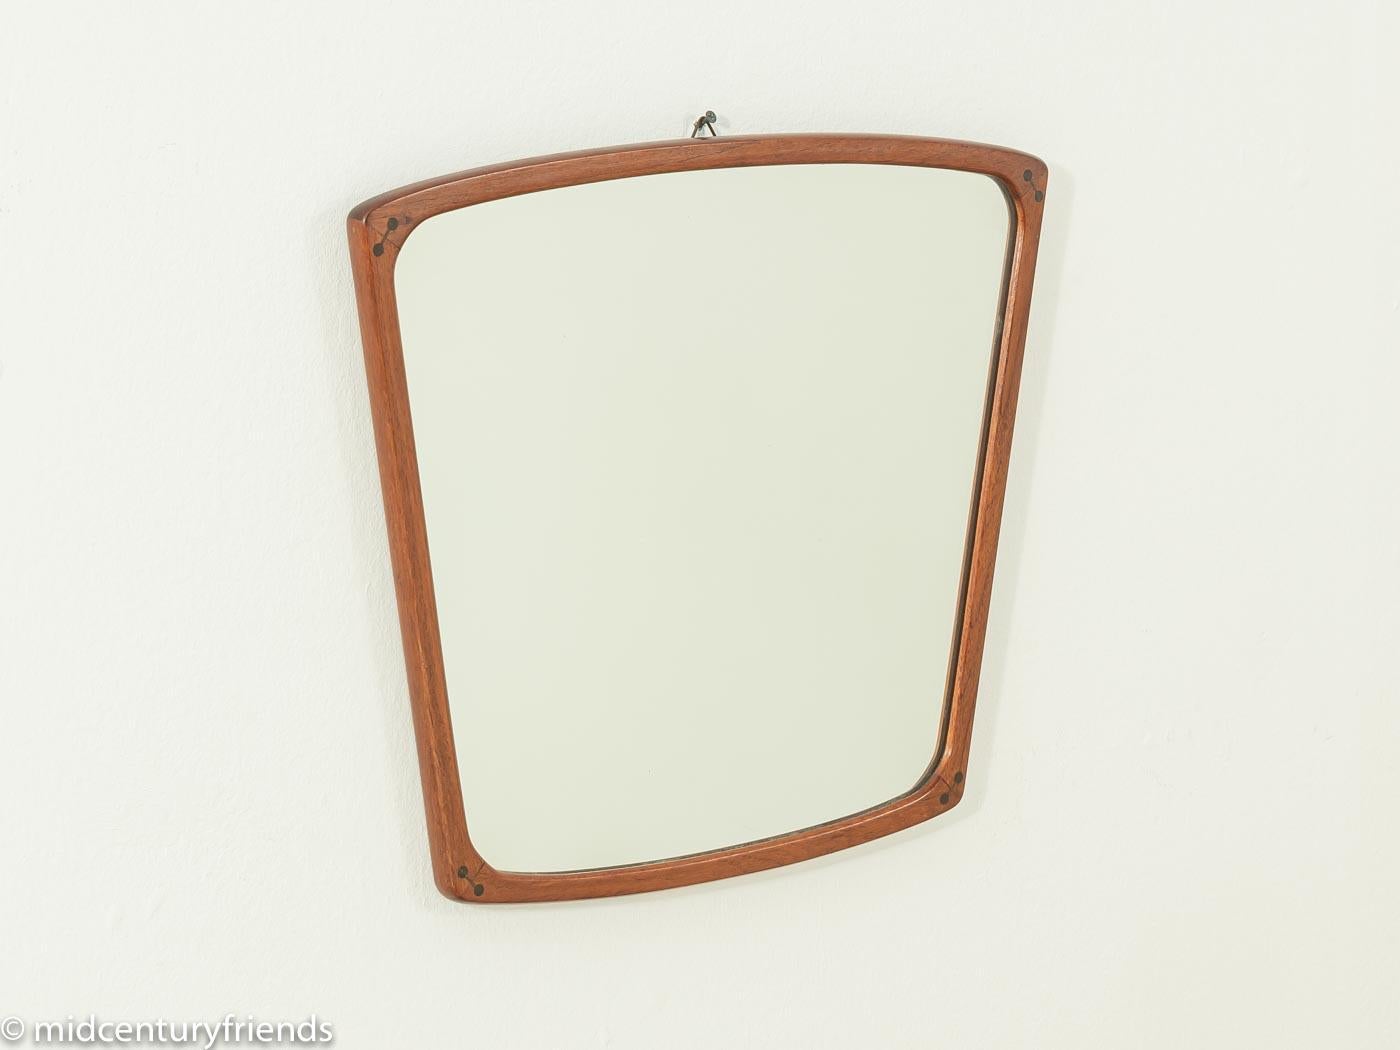 Classic mirror from the 1960s with a high-quality solid wood frame in teak. Made in Denmark, manufacturer: Aksel Kjersgaard. 